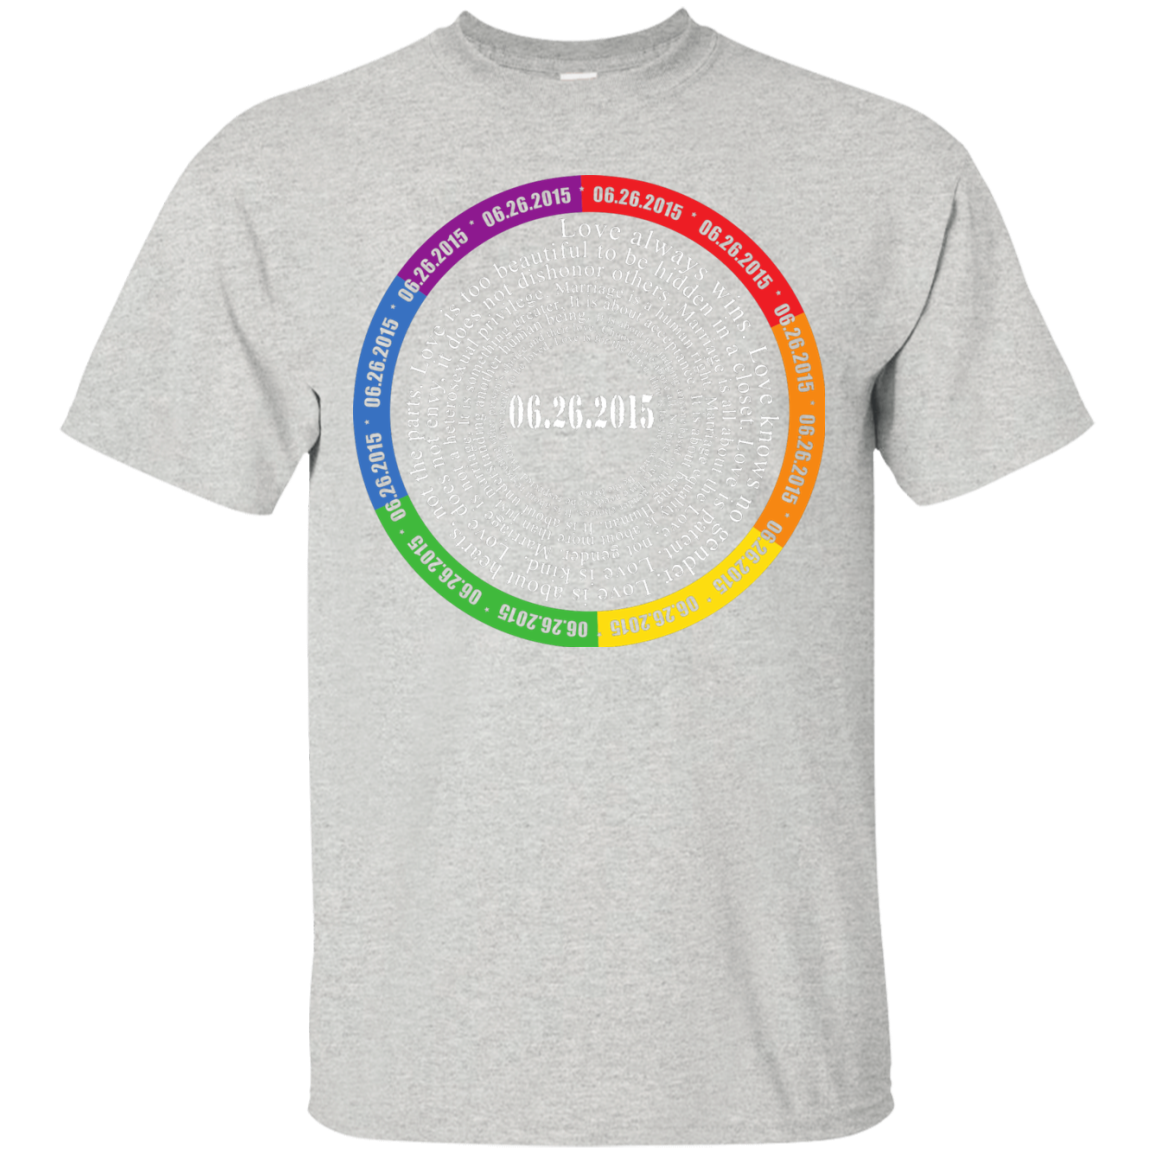 The "Pride Month" Special Shirt LGBT Pride shirt for Men